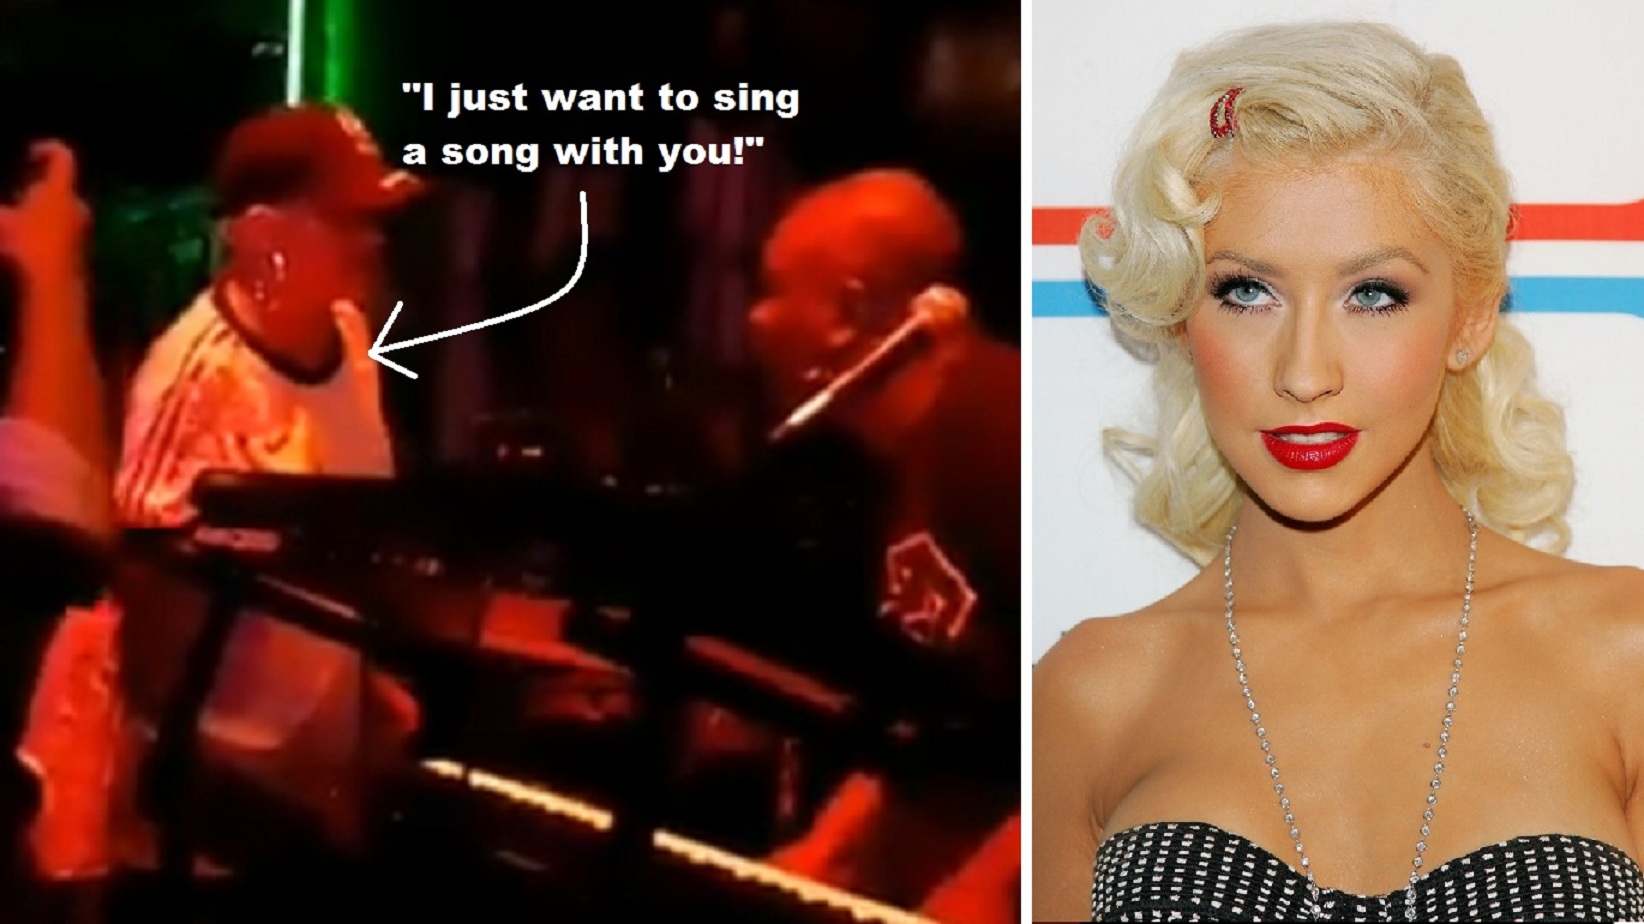 Watch: New Orleans Band Denied Christina Aguilera’s Request To Sing With Them On-Stage At A Bar!